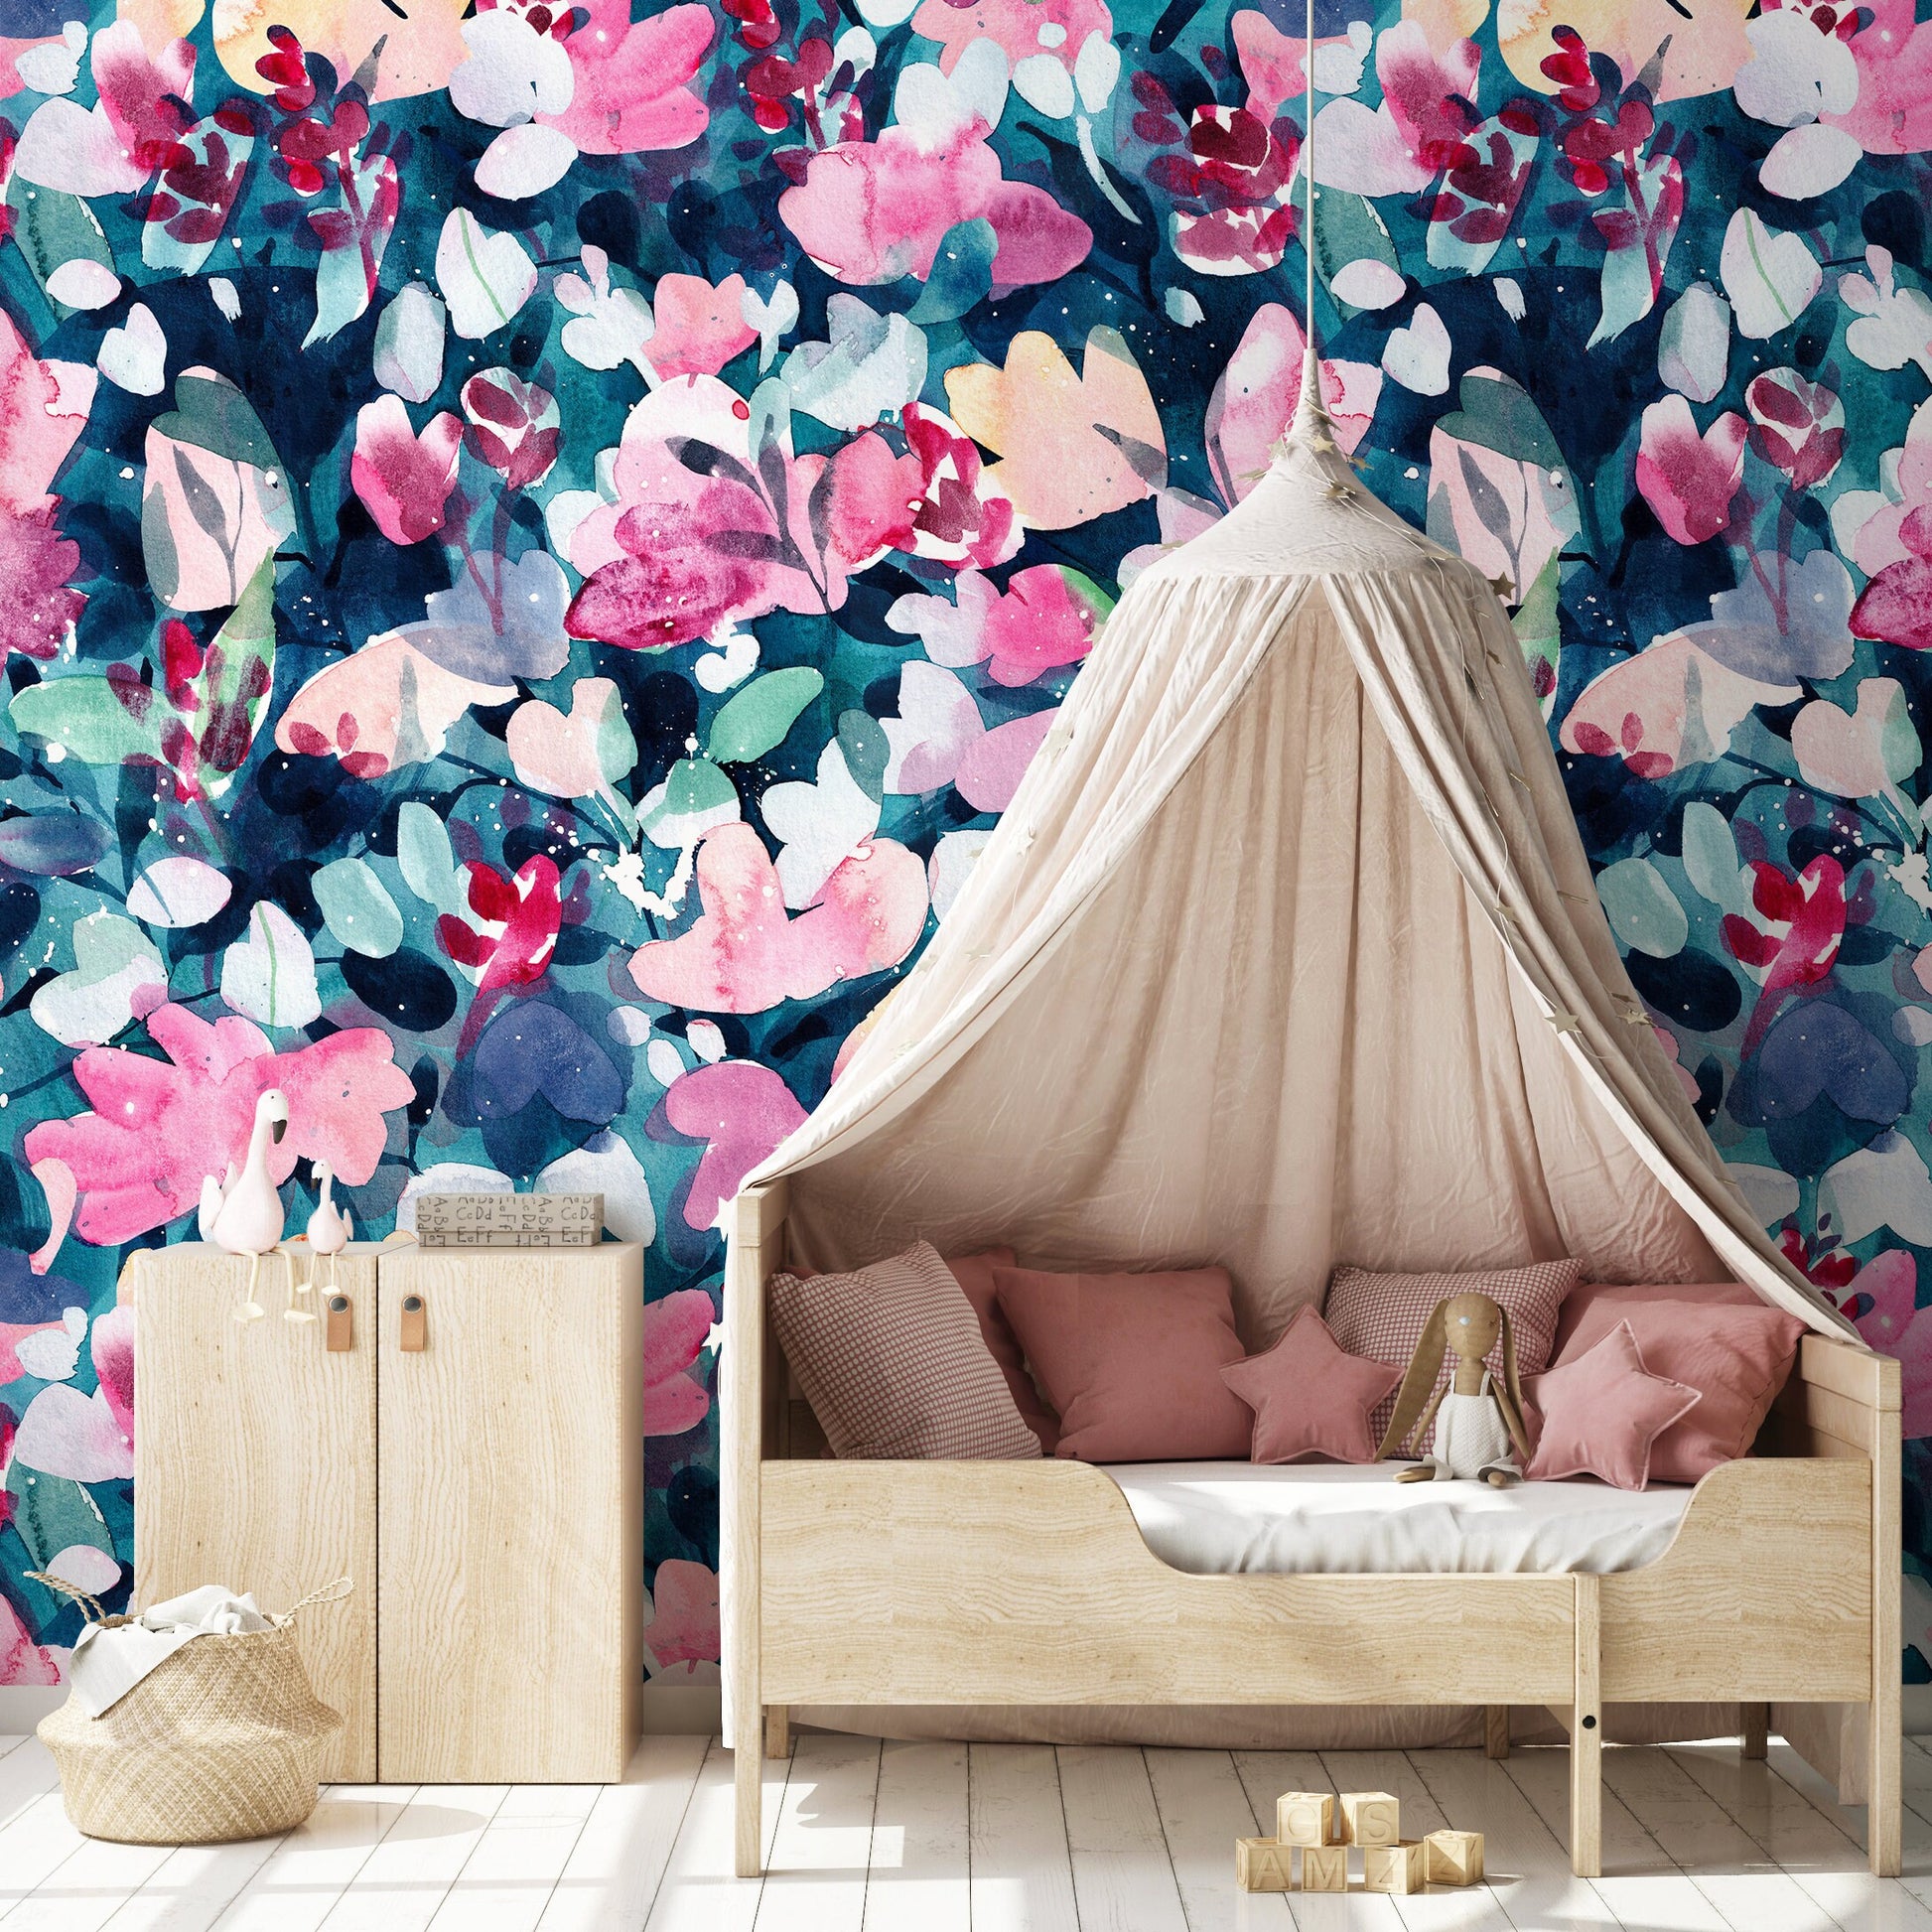 Wallpaper Peel and Stick Wallpaper Removable Wallpaper Home Decor Wall Art Wall Decor Room Decor / Floral Colourful Wallpaper - X149